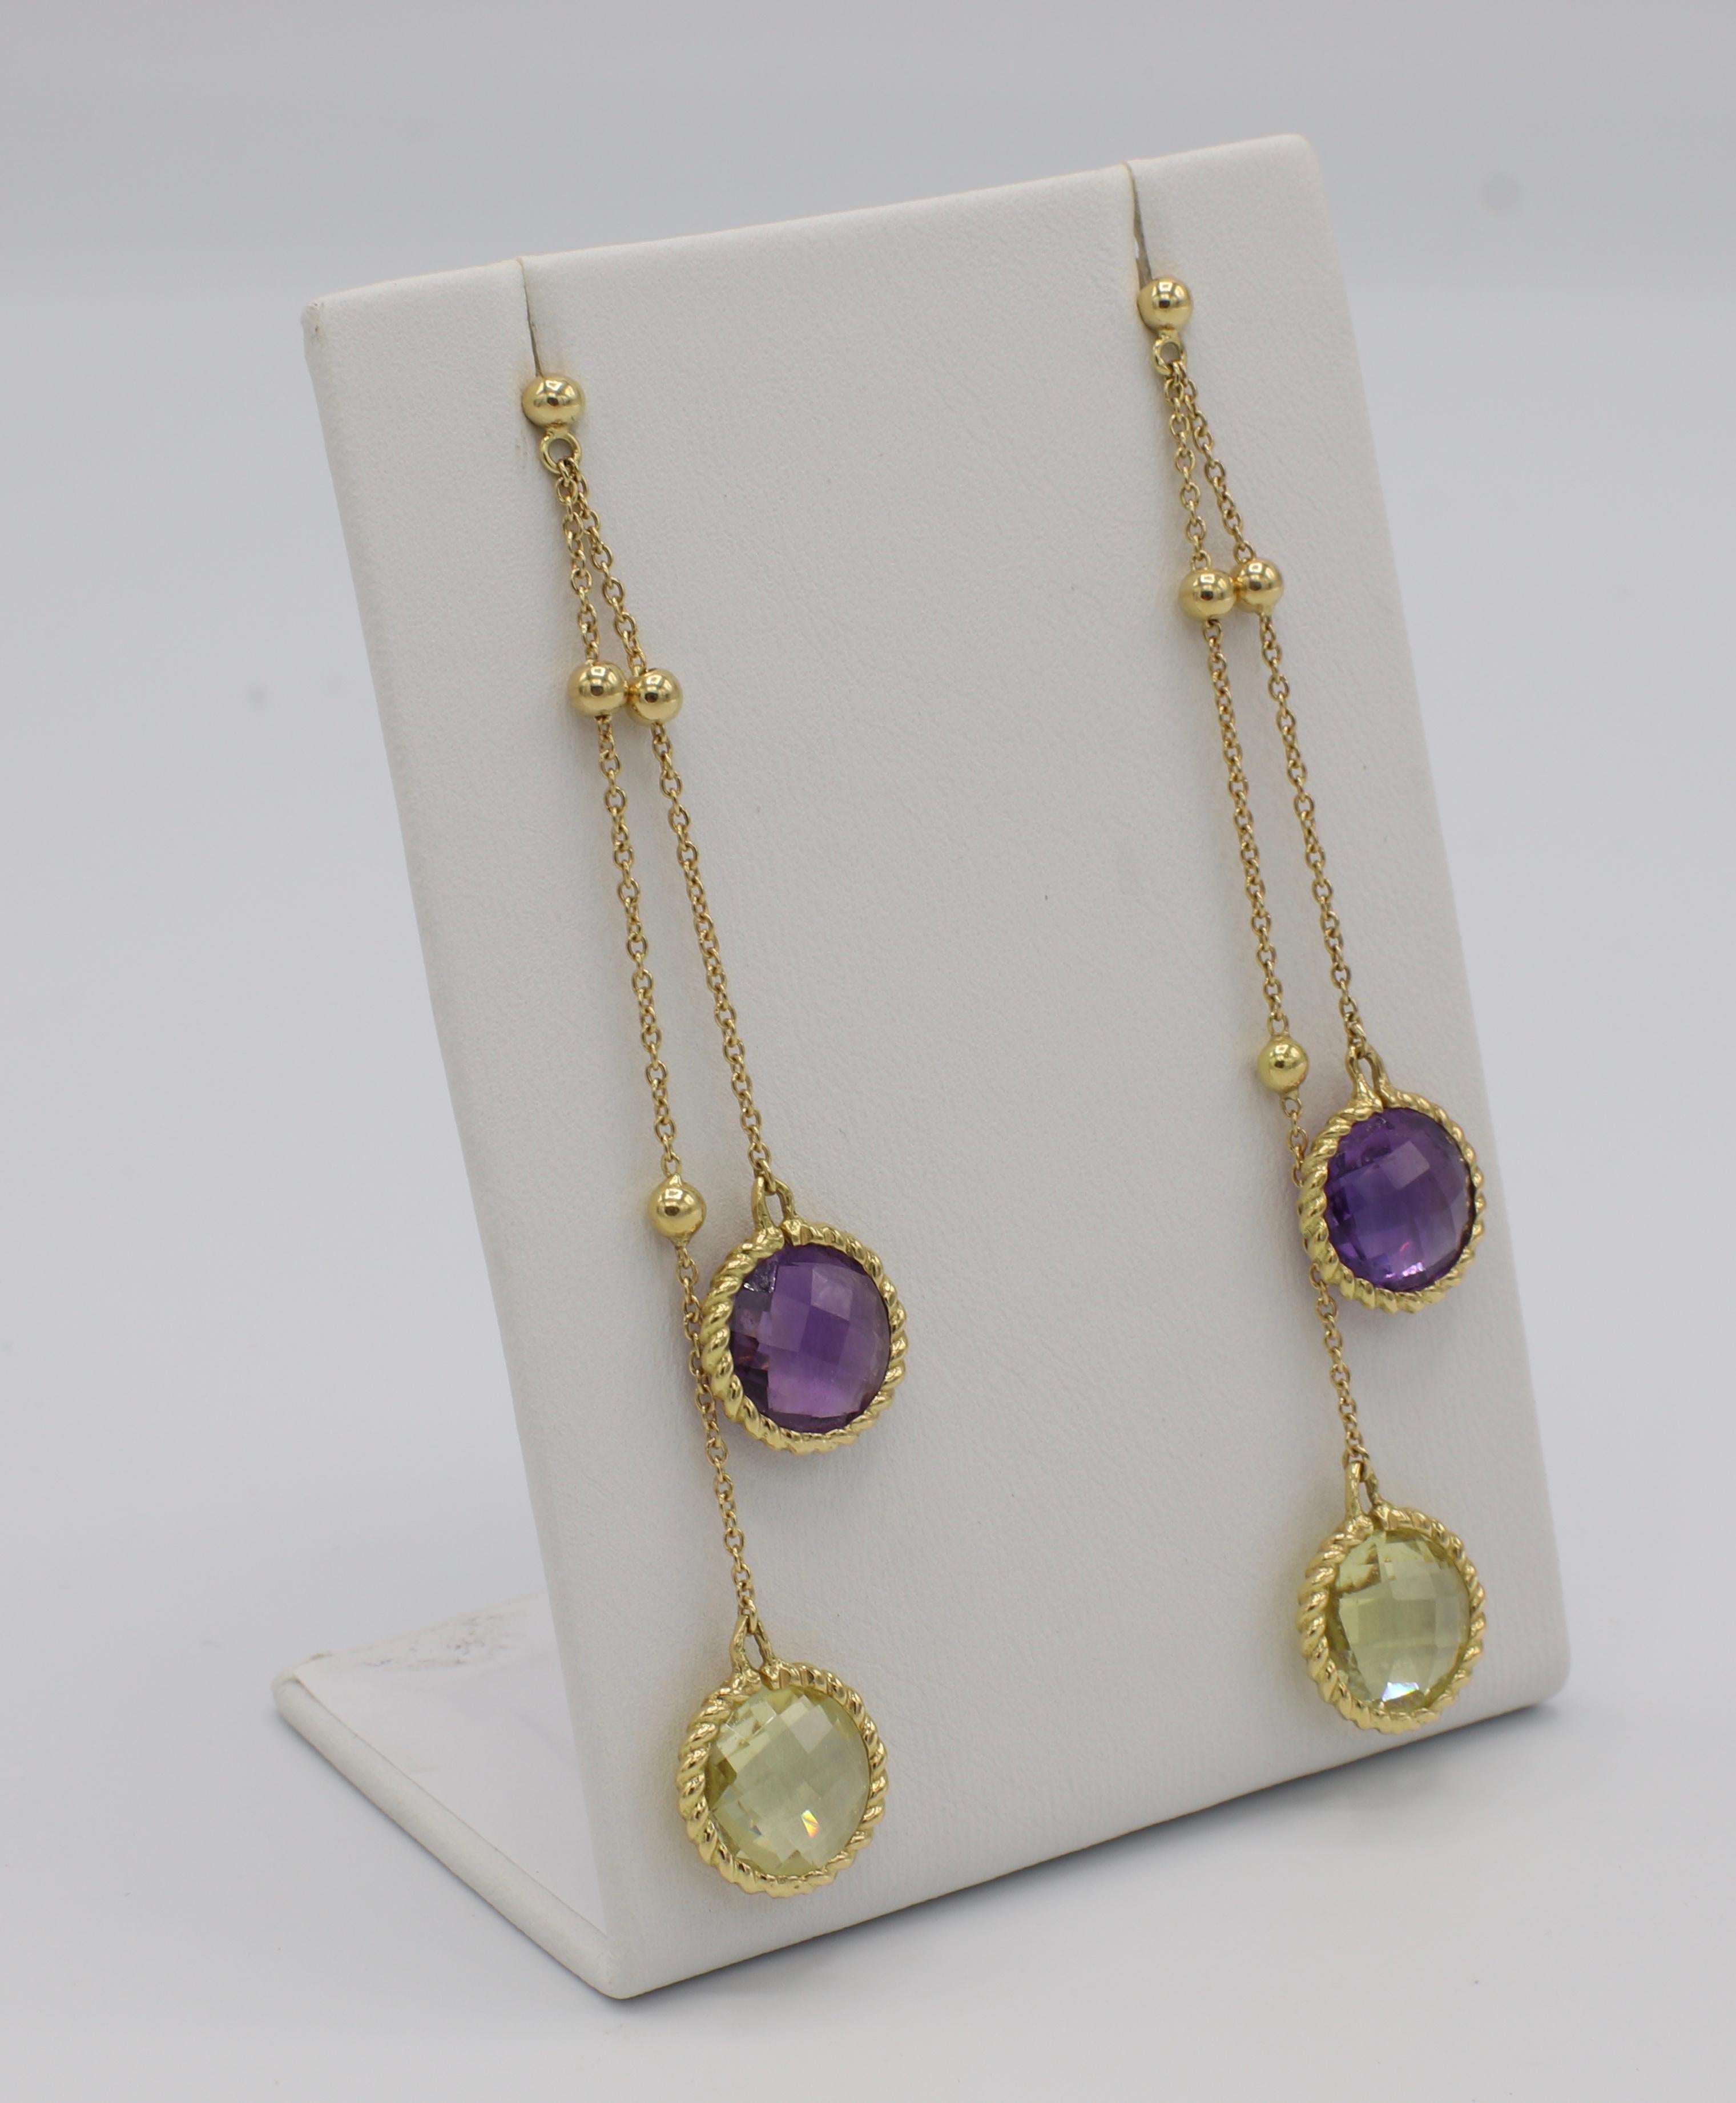 Roberto Coin Ipanema 18K Amethyst & Citrine Dangle Drop Earrings 

Metal: 18k yellow gold
Weight: 7.75 grams
Length: 3 inches
